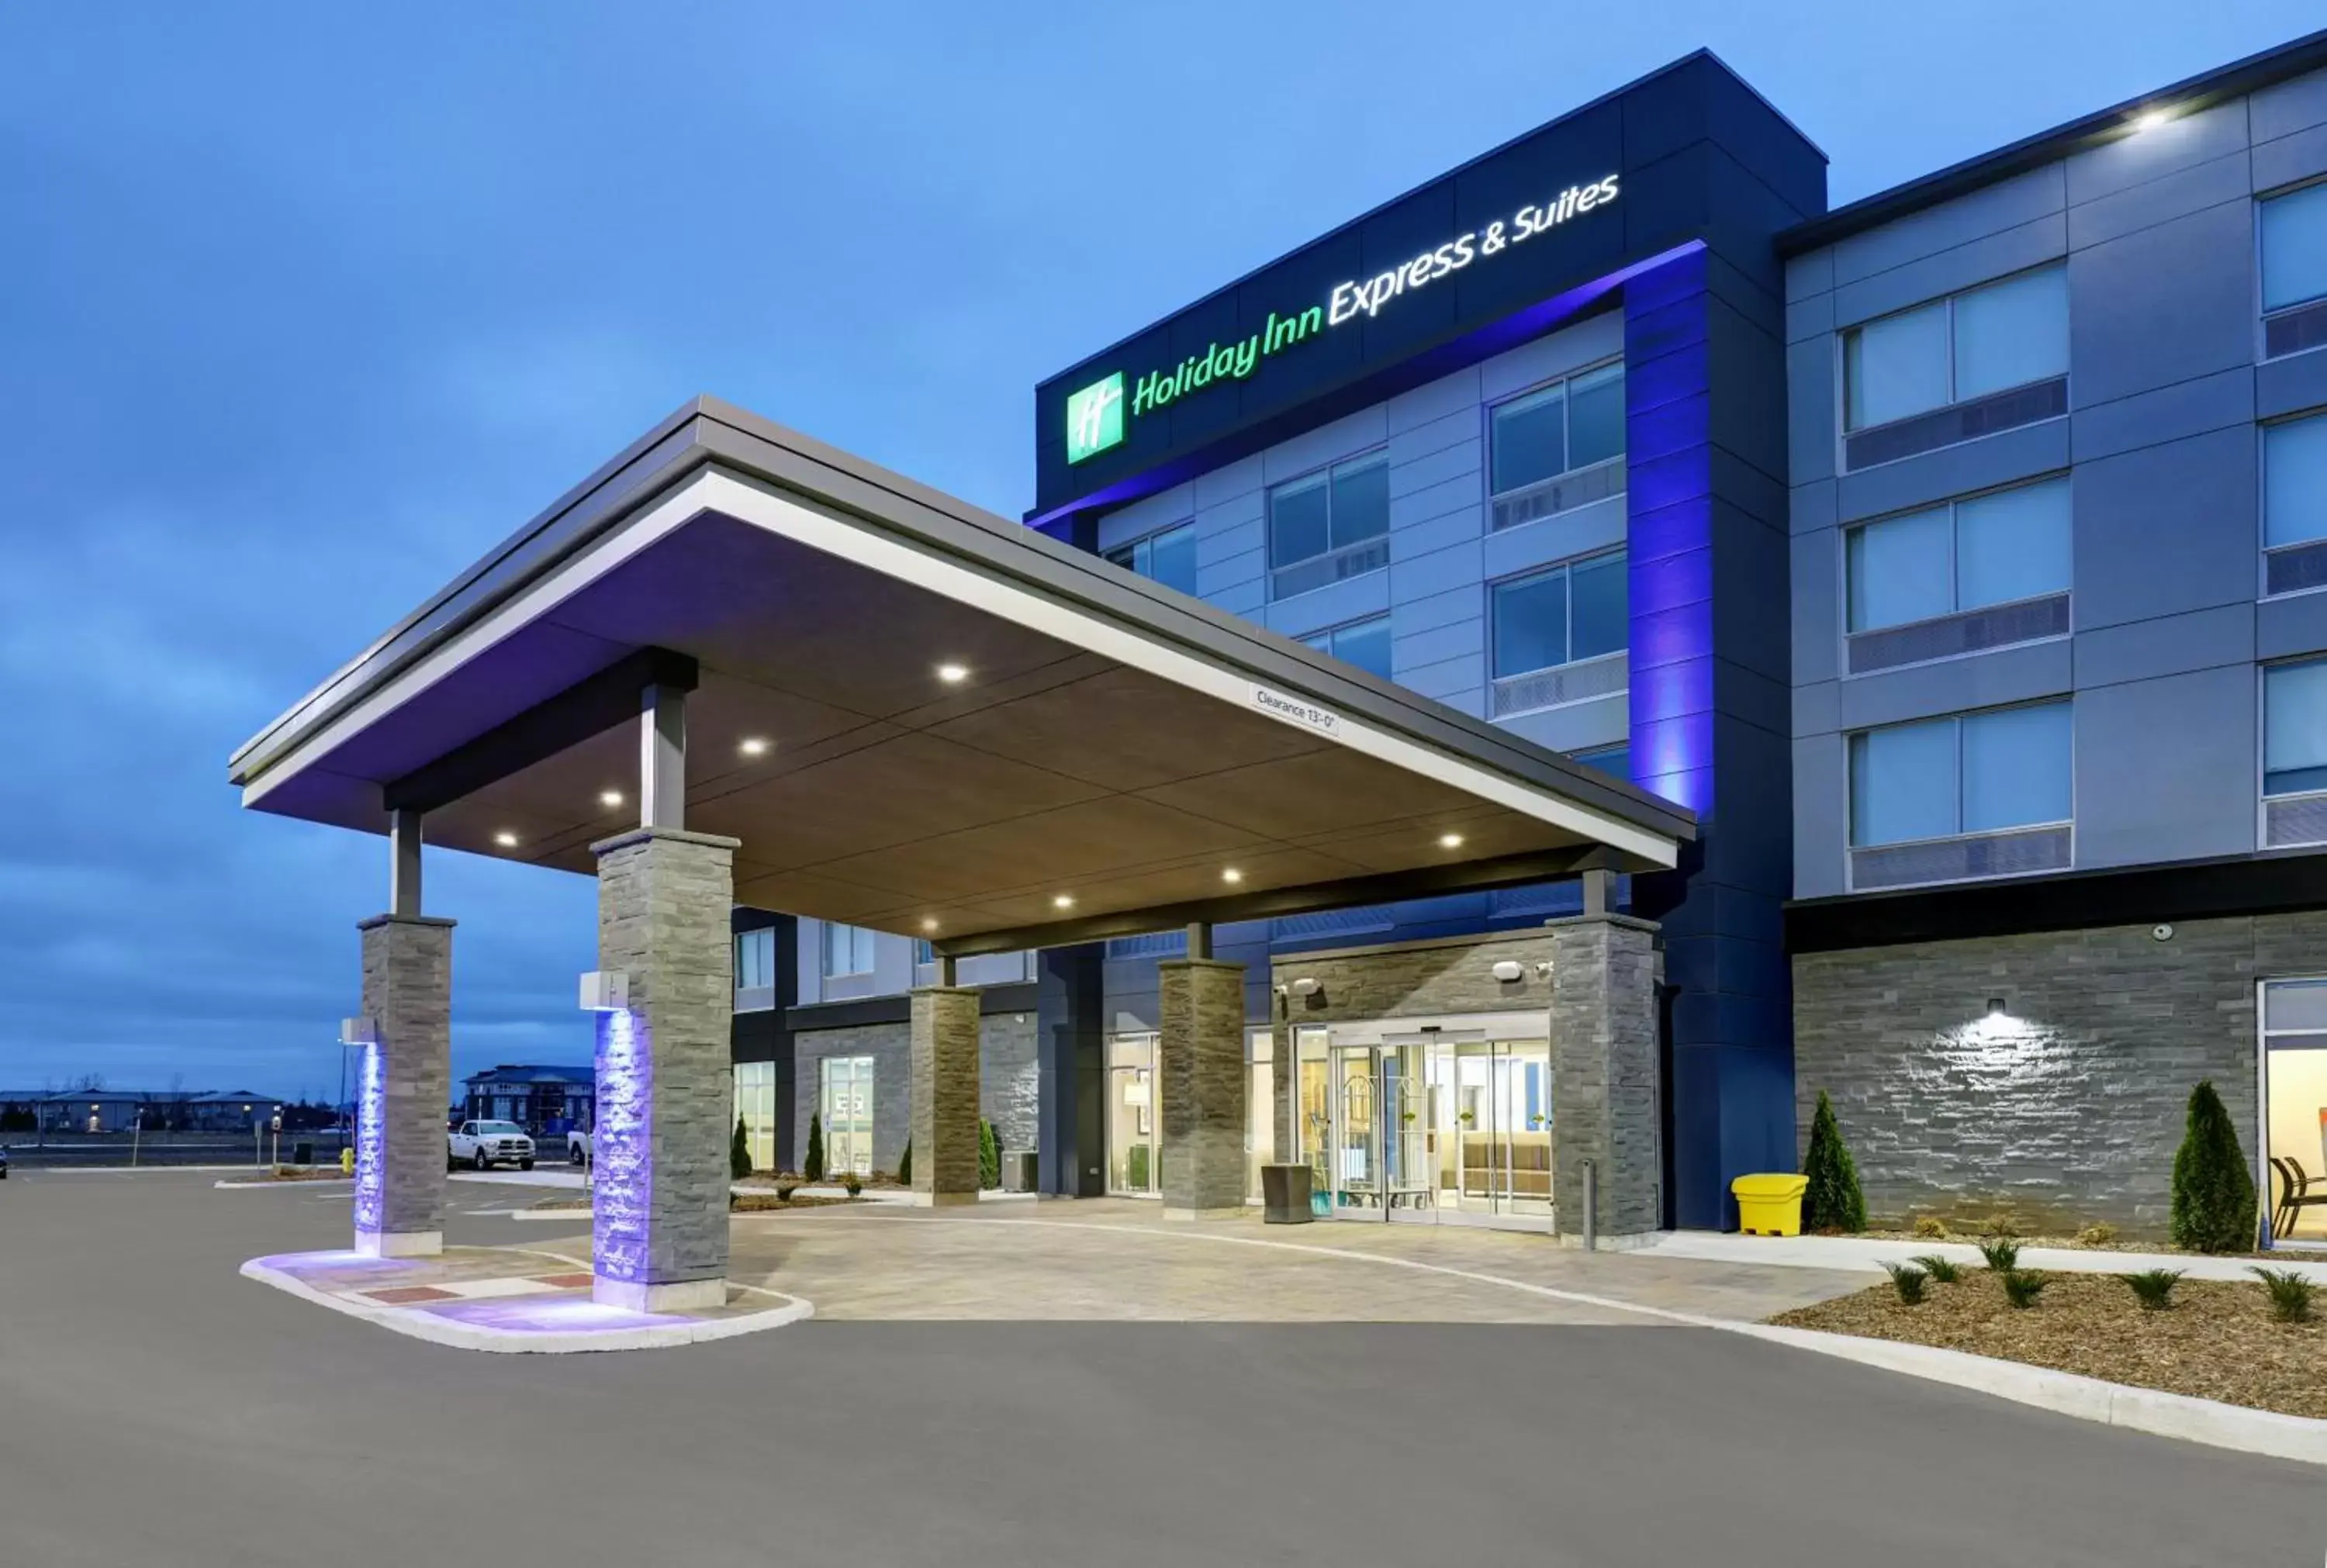 Property building in Holiday Inn Express & Suites - Port Elgin